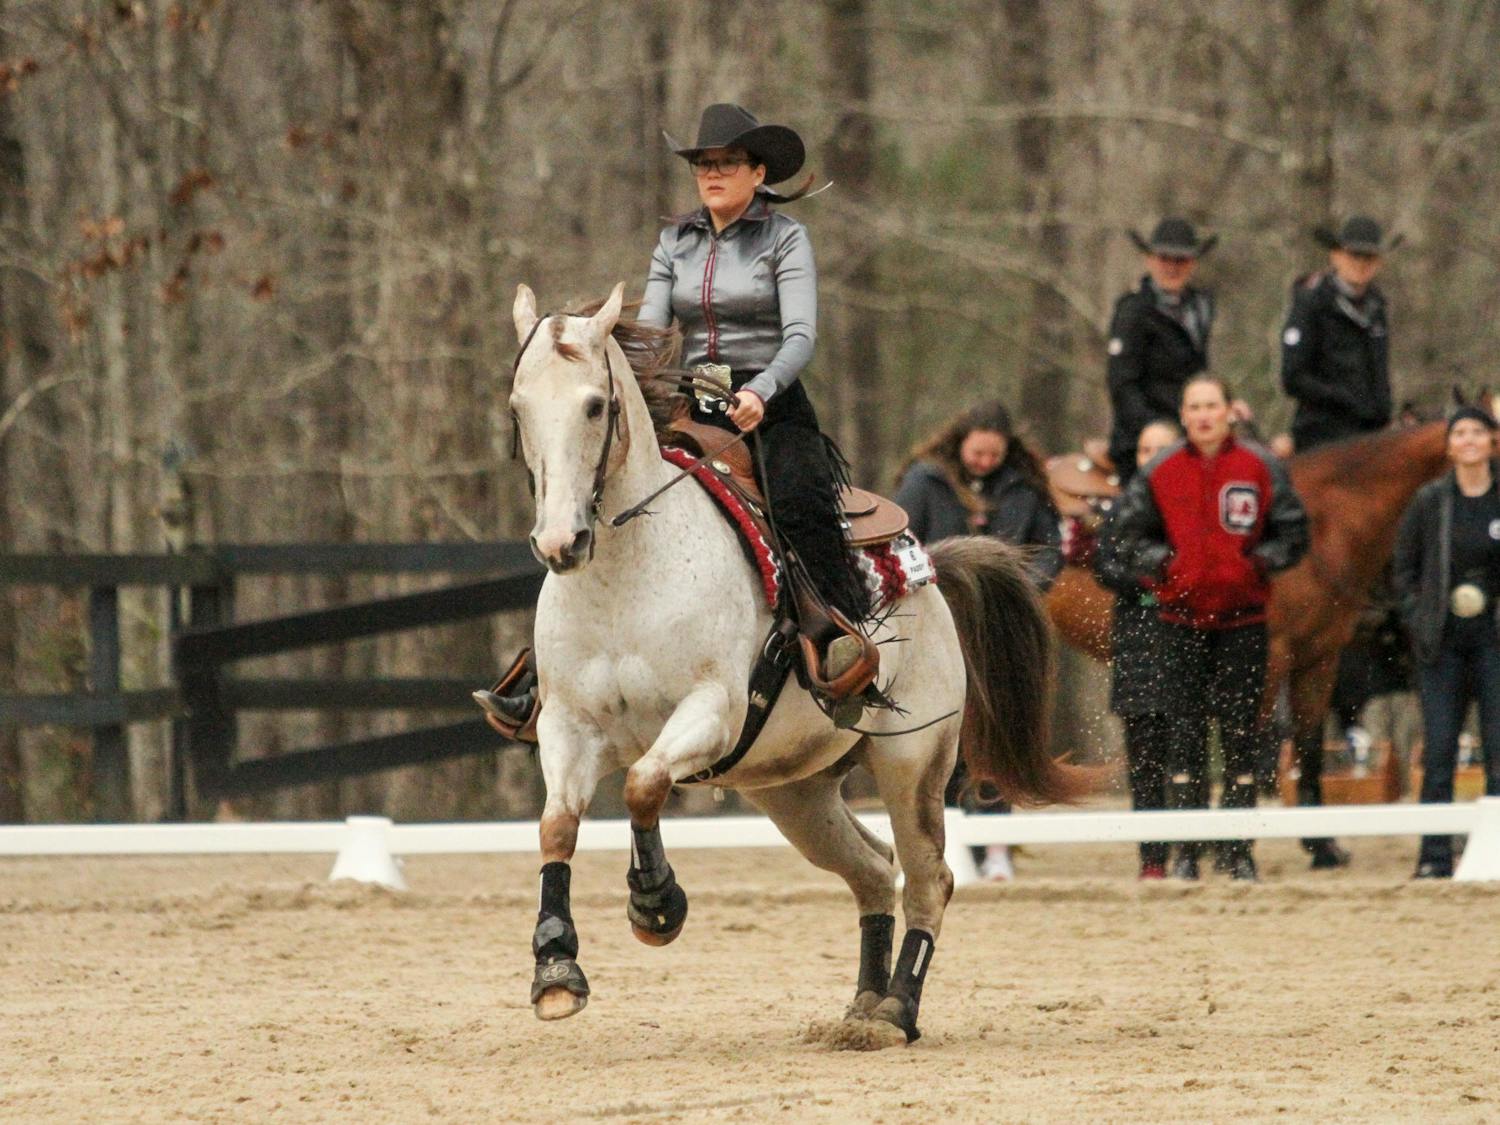 Senior Claire Pound, mounted on Paddy, demonstrates the pattern for the reigning category during the meet against Texas A&amp;M at One Wood Farm on Feb. 11, 2023. Pound is superstitious about what she wears when gearing up to compete. “I always wear the same jewelry. I have a ring that I always have to wear in the same spot. I wear it on my right thumb every single time I show,” Pound said.&nbsp;